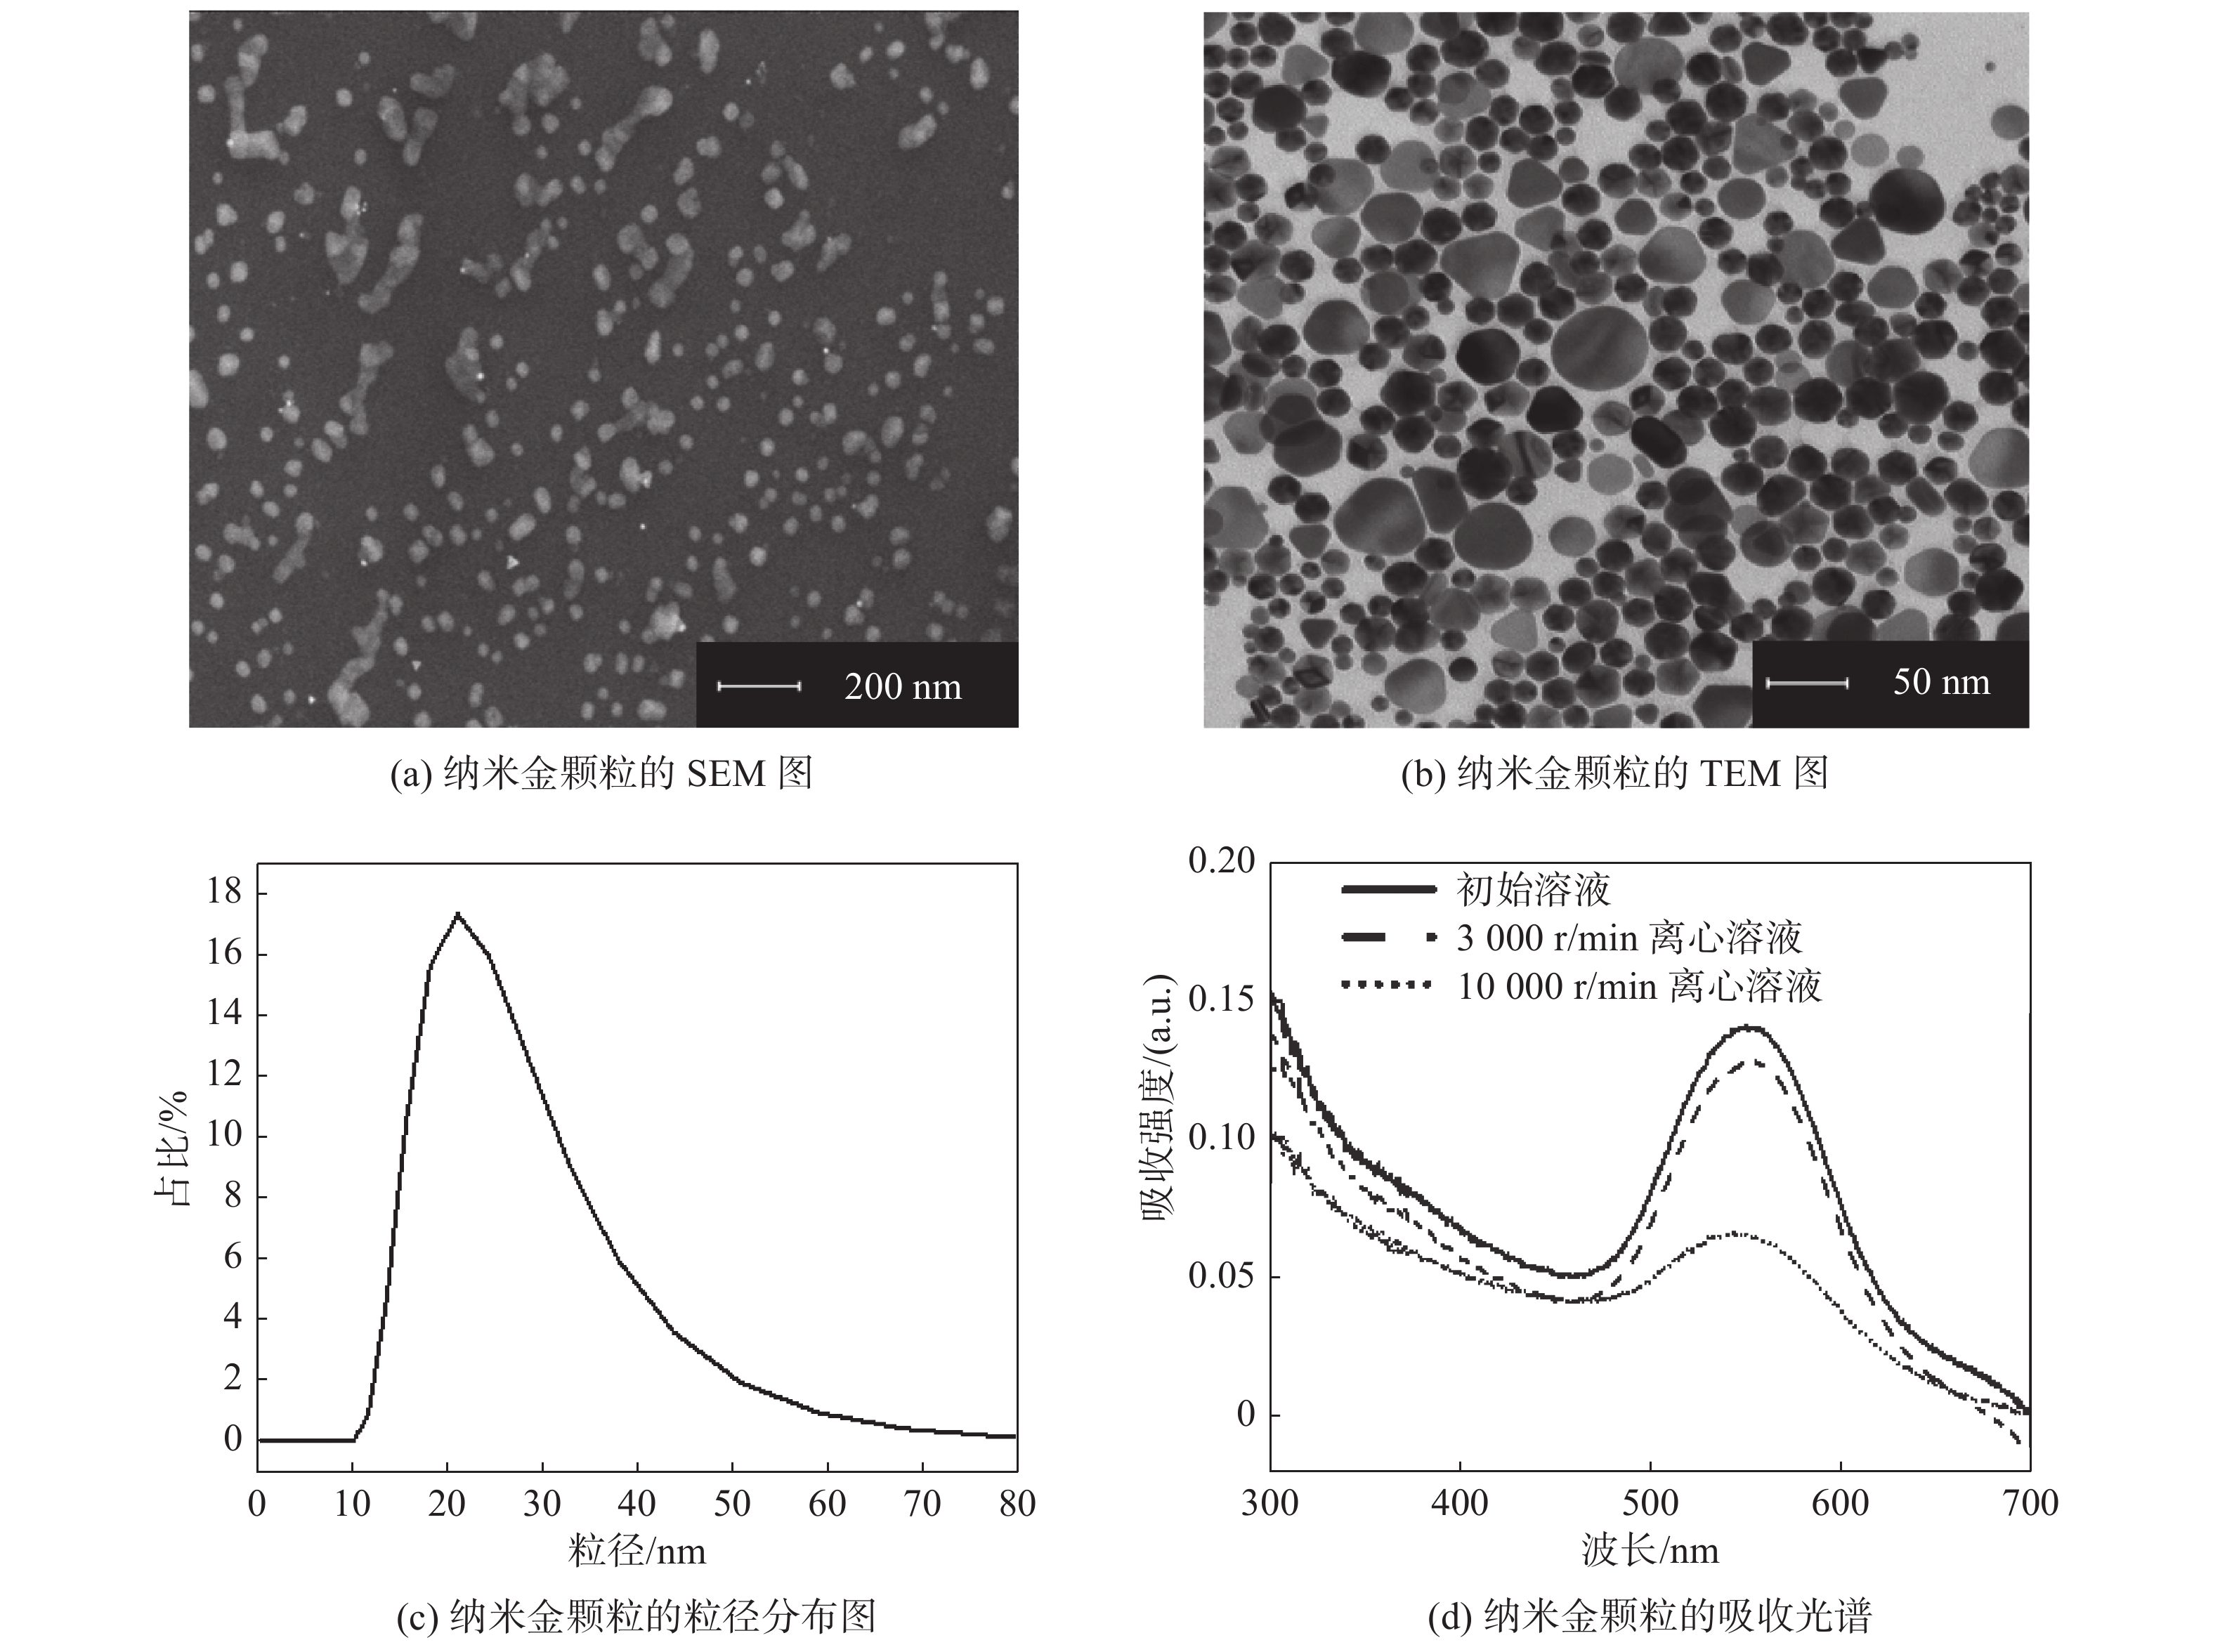 Characterization of gold nanoparticles